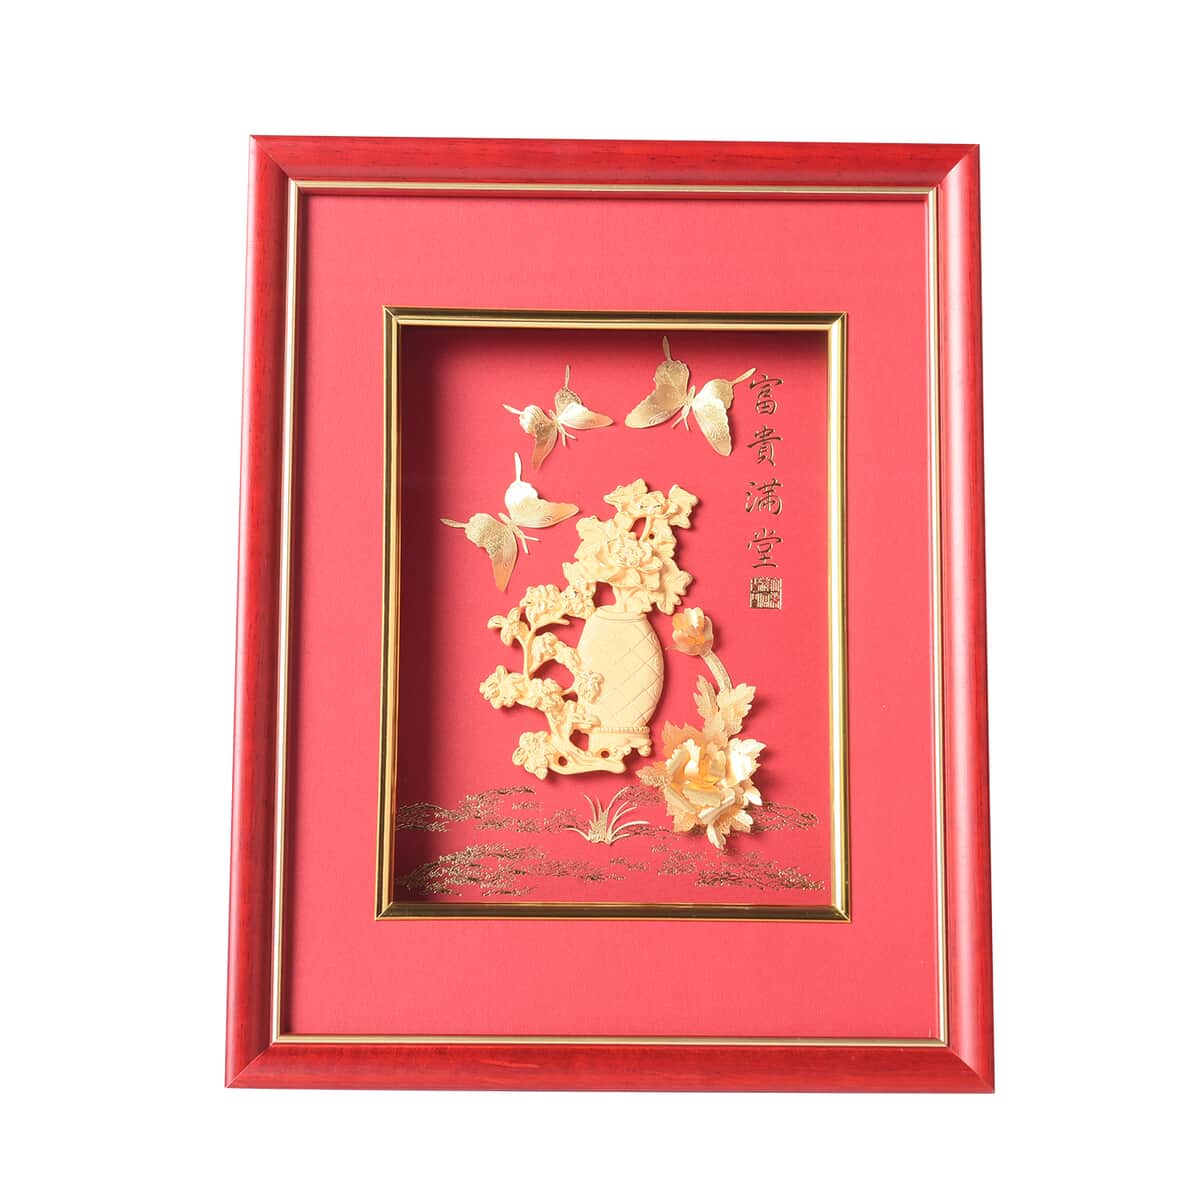 24K Gold Plated Layer Vase Exhibit Wall Decor Frame image number 0